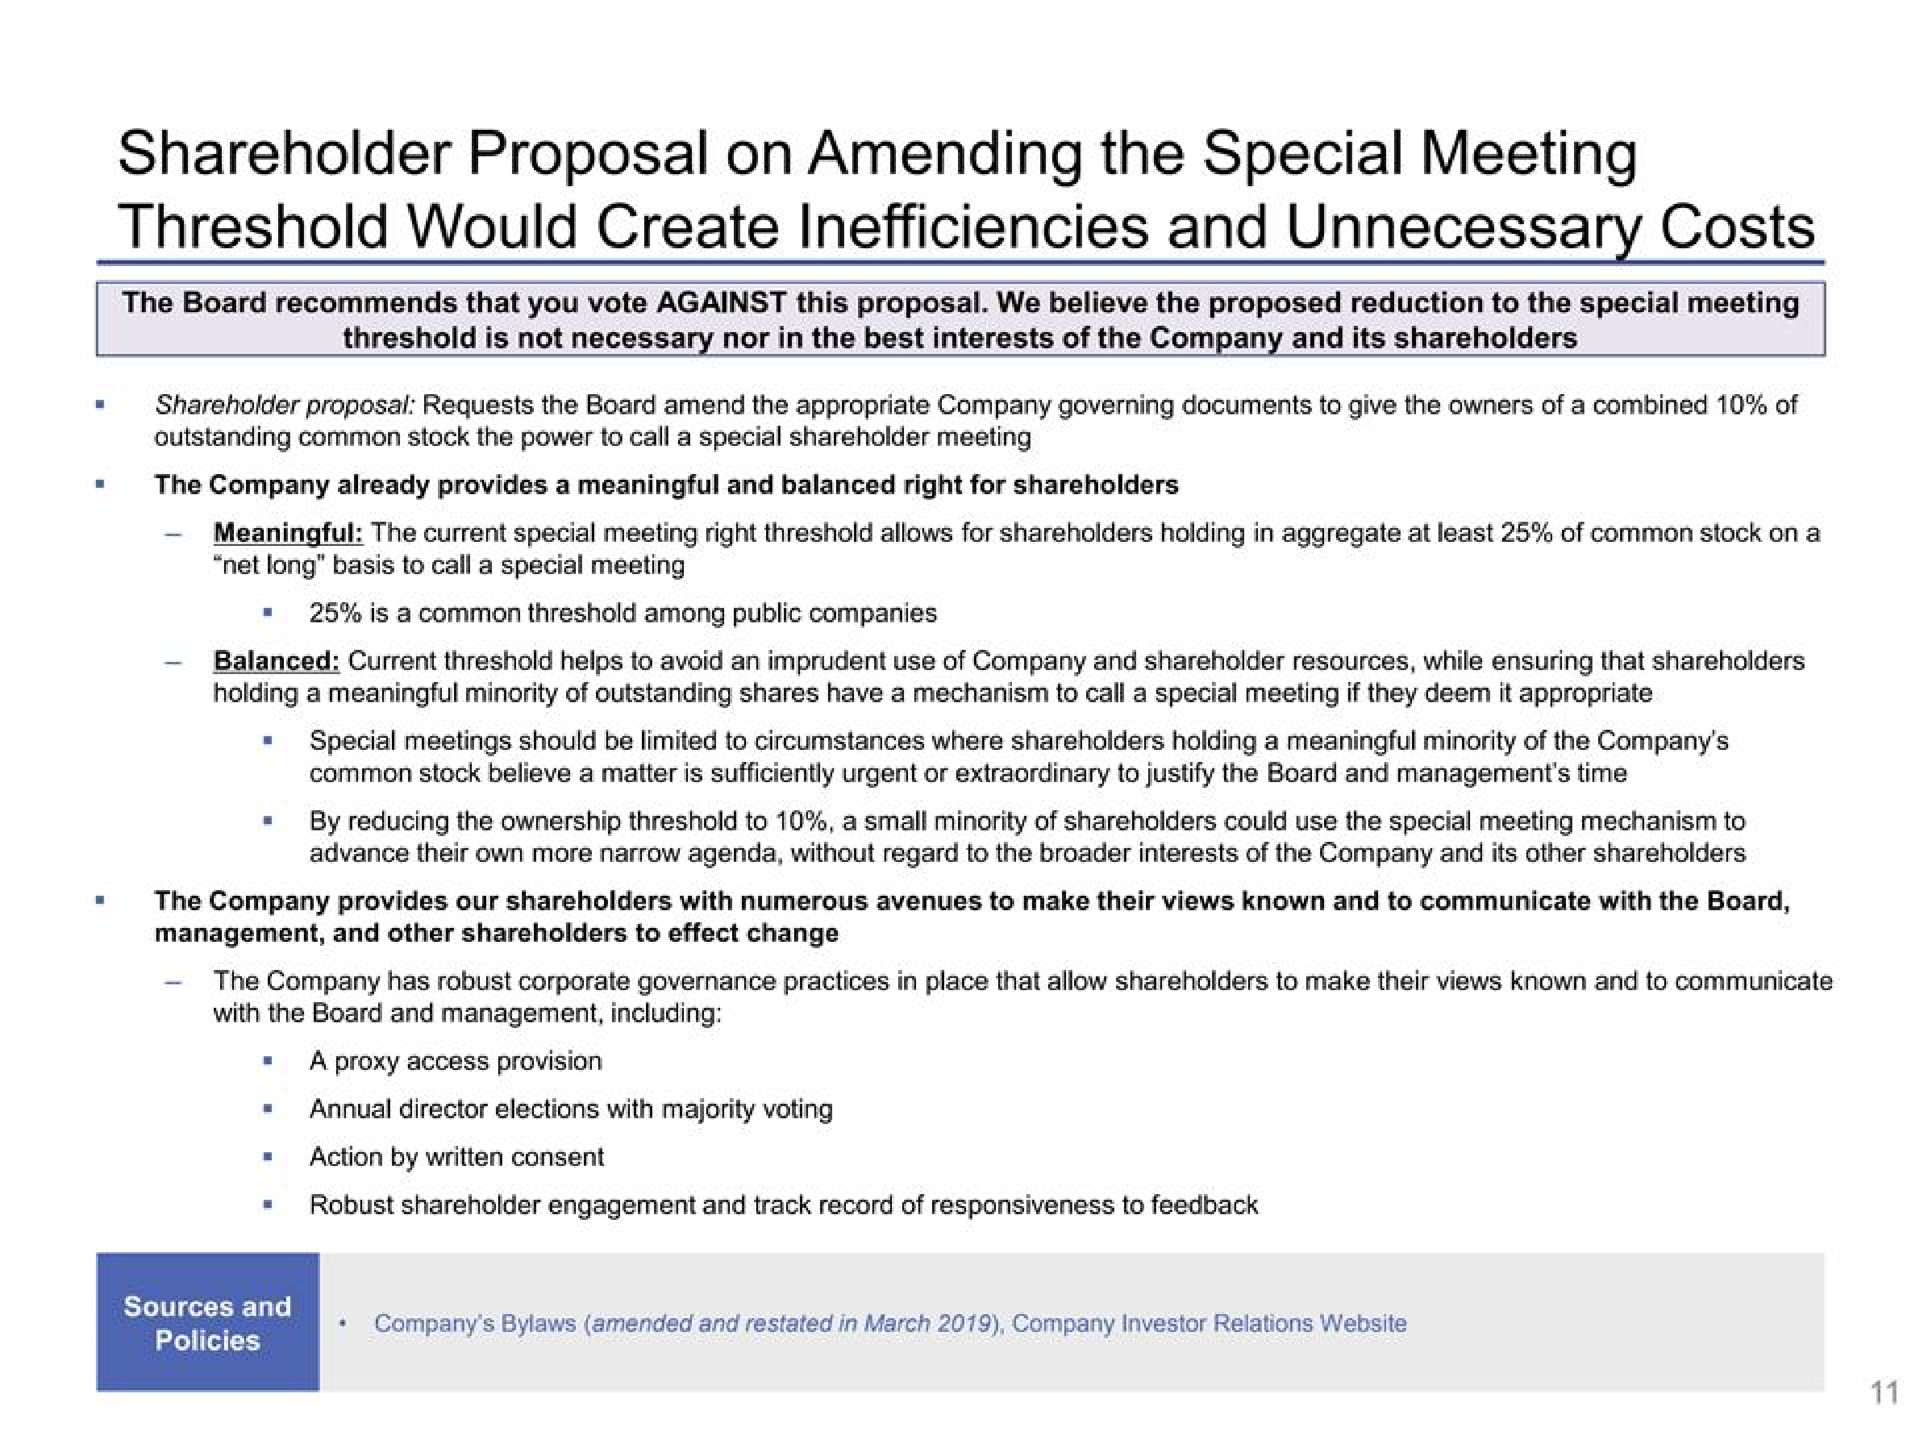 shareholder proposal on amending the special meeting threshold would create inefficiencies and unnecessary costs | Disney